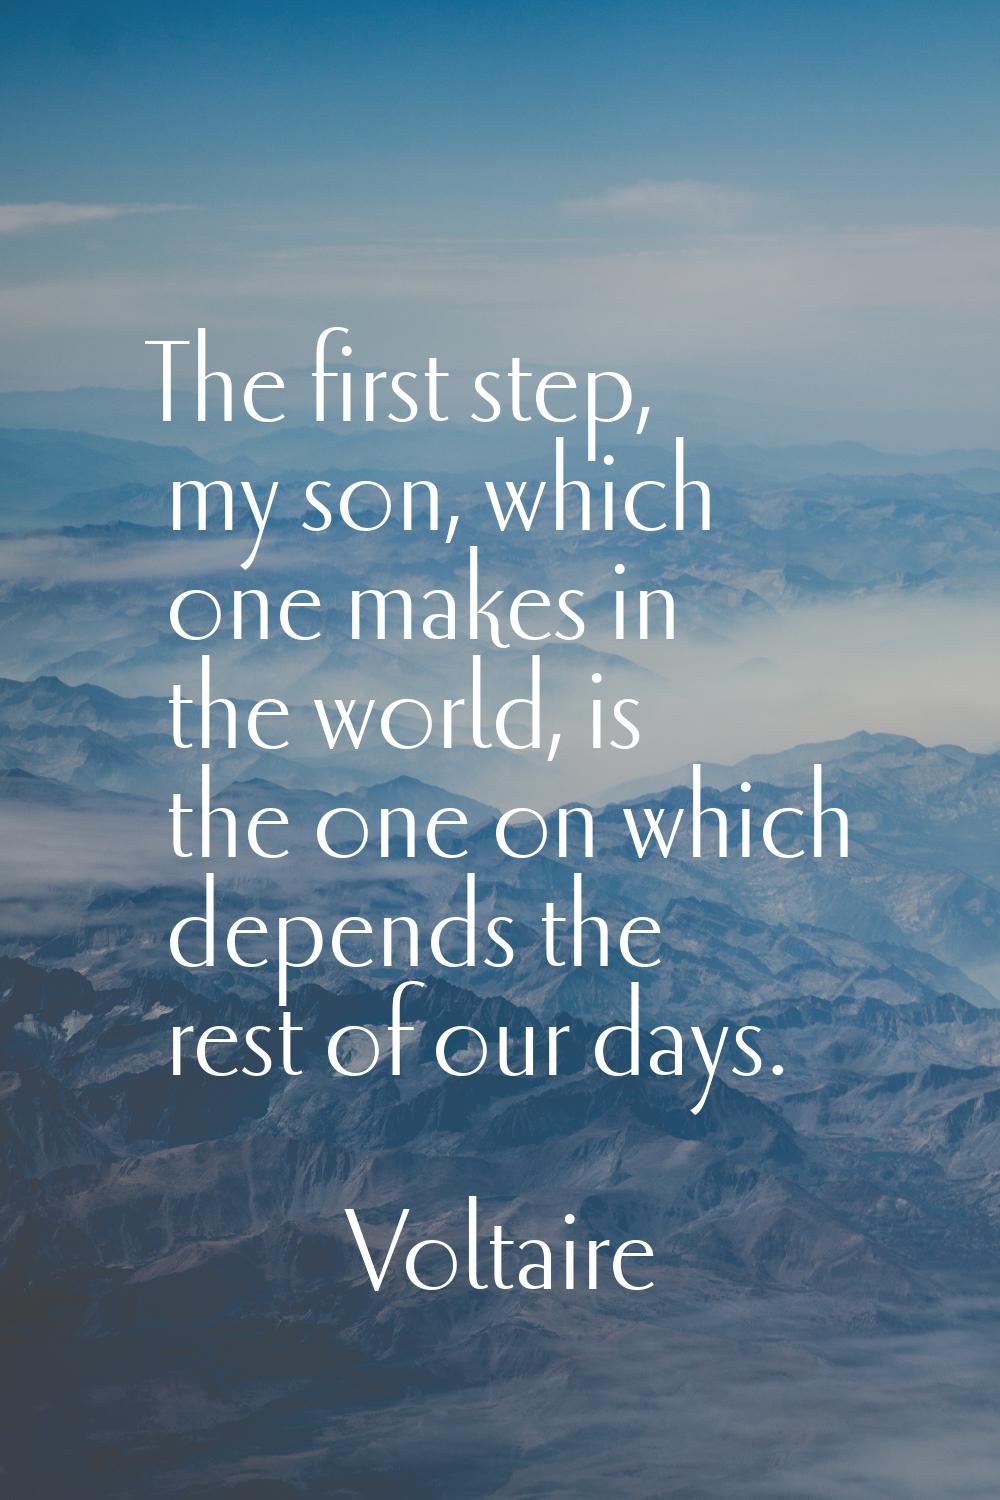 The first step, my son, which one makes in the world, is the one on which depends the rest of our d